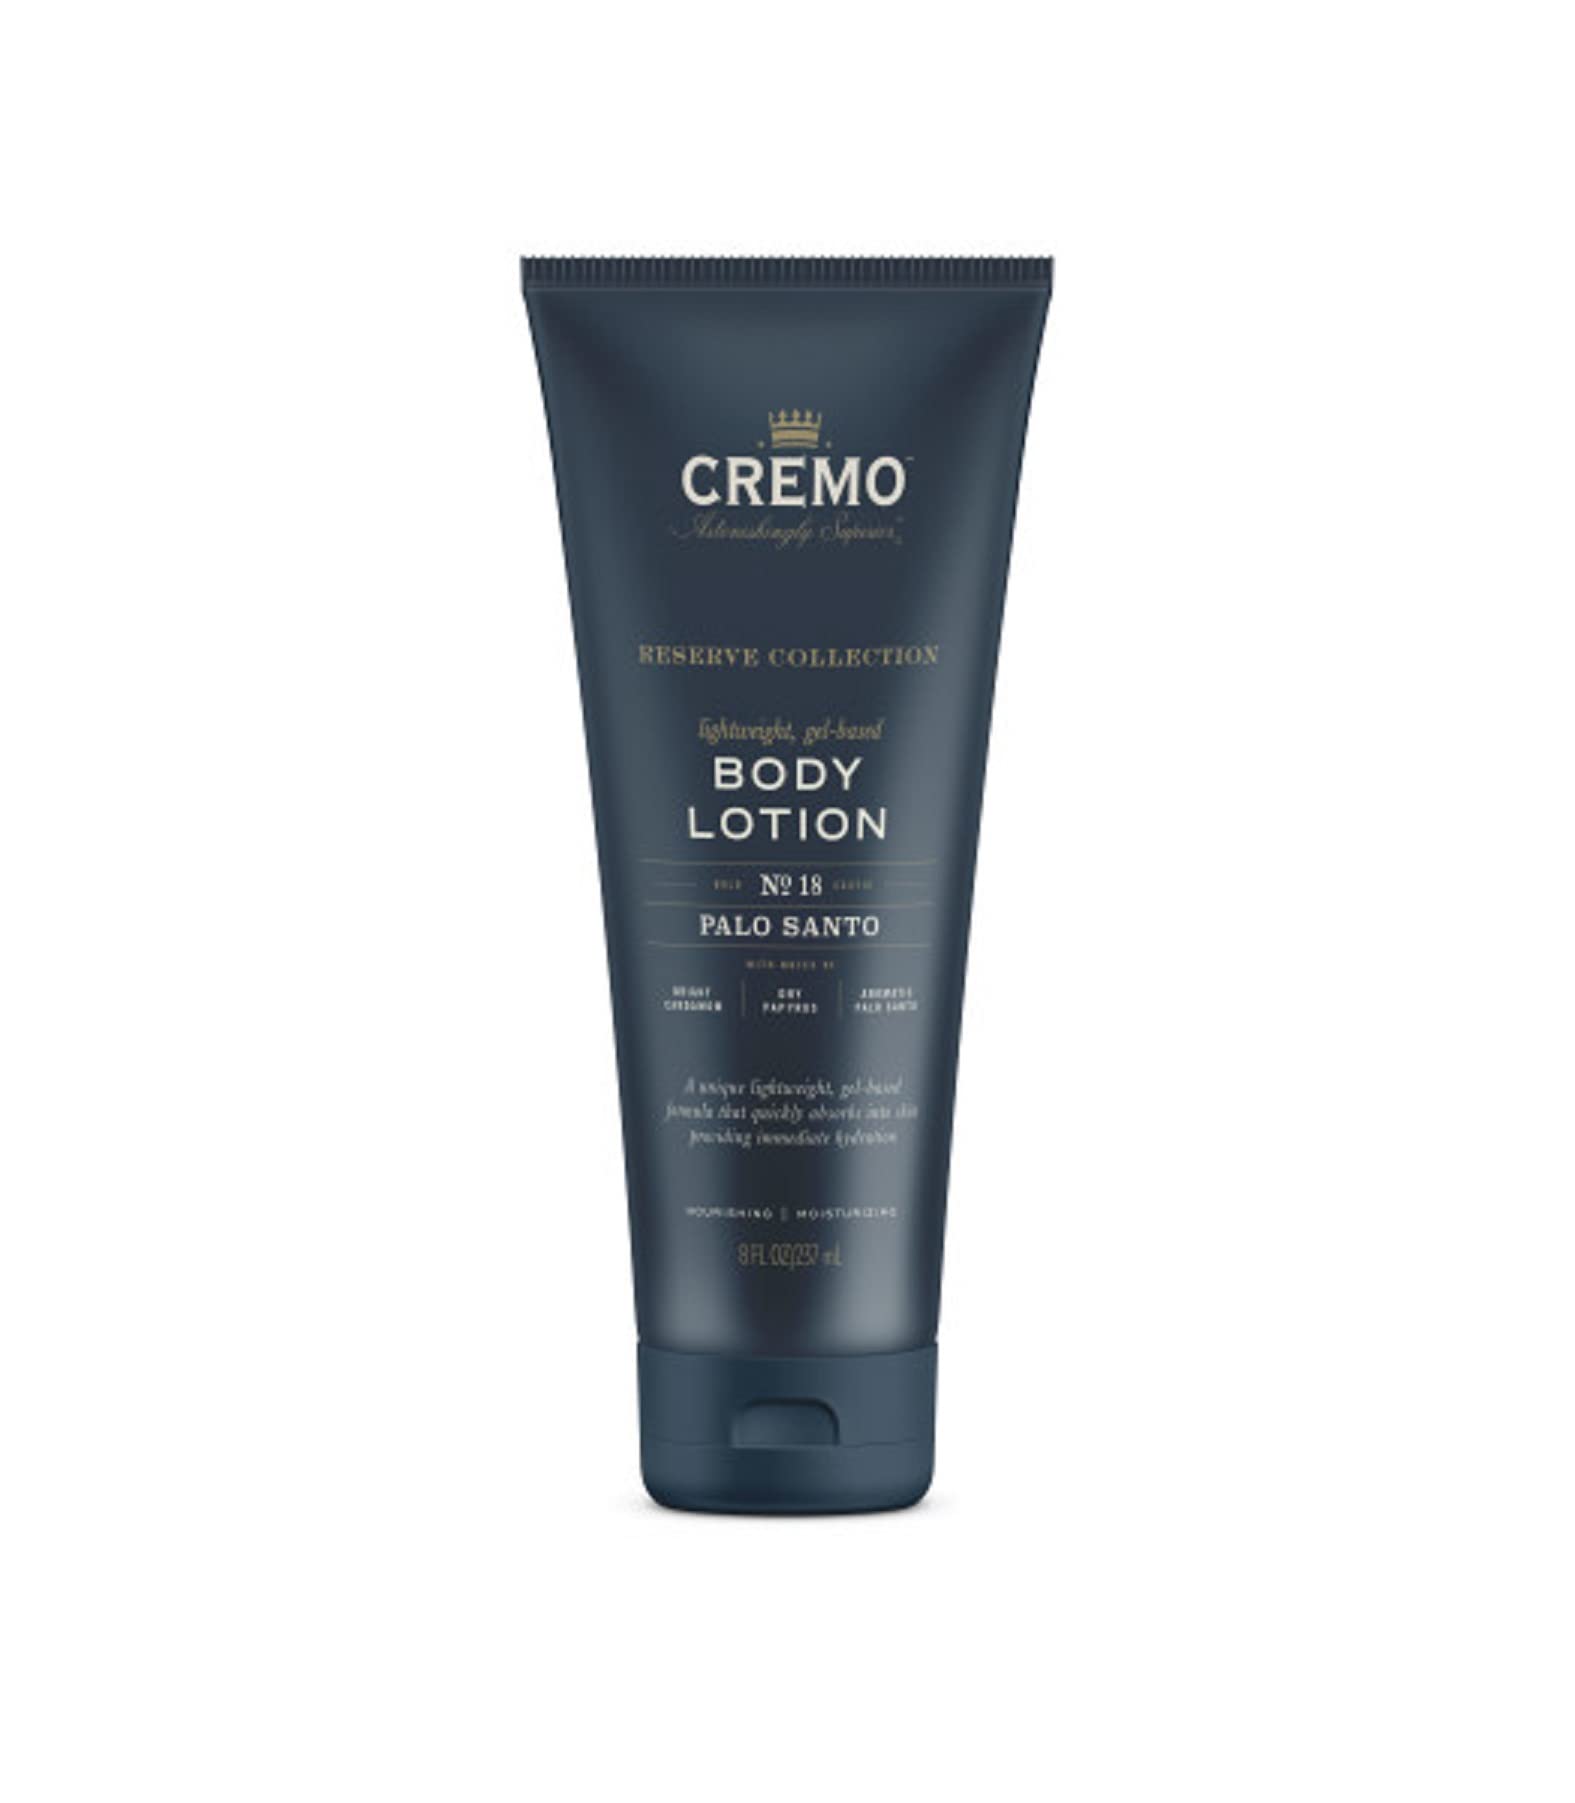 Cremo Palo Santo (Reserve Collection) Body Lotion, 8 Fluid Ounce